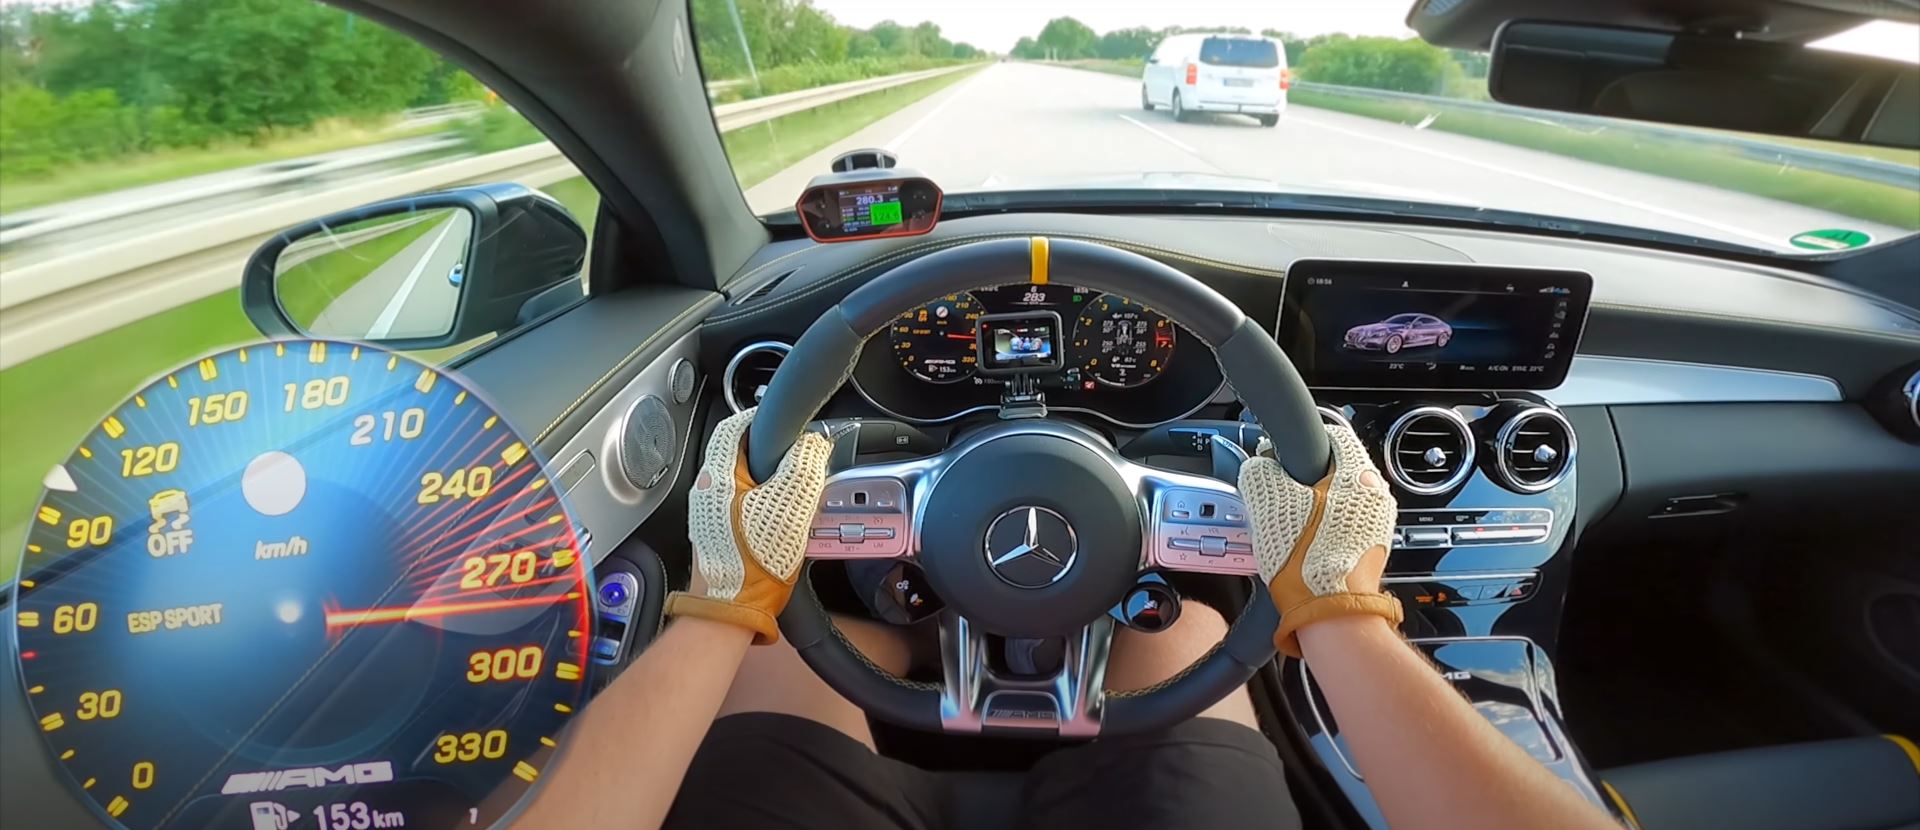 New Mercedes-AMG C63 S Coupe Does an Autobahn Top Speed Run, Doesn't 200 MPH autoevolution